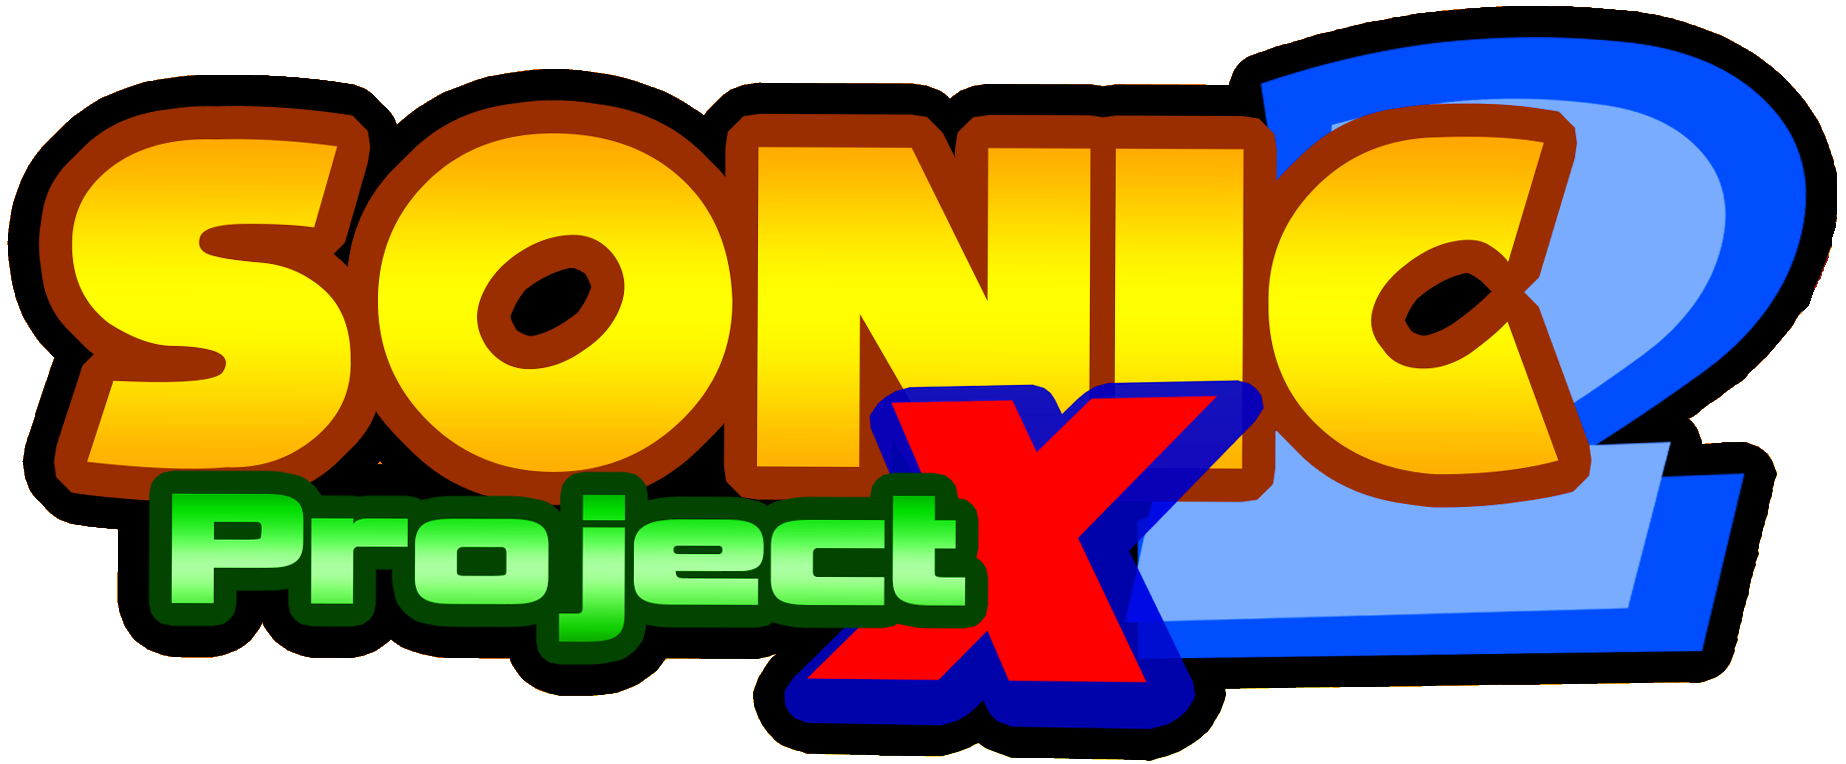 sonic x project love download zu